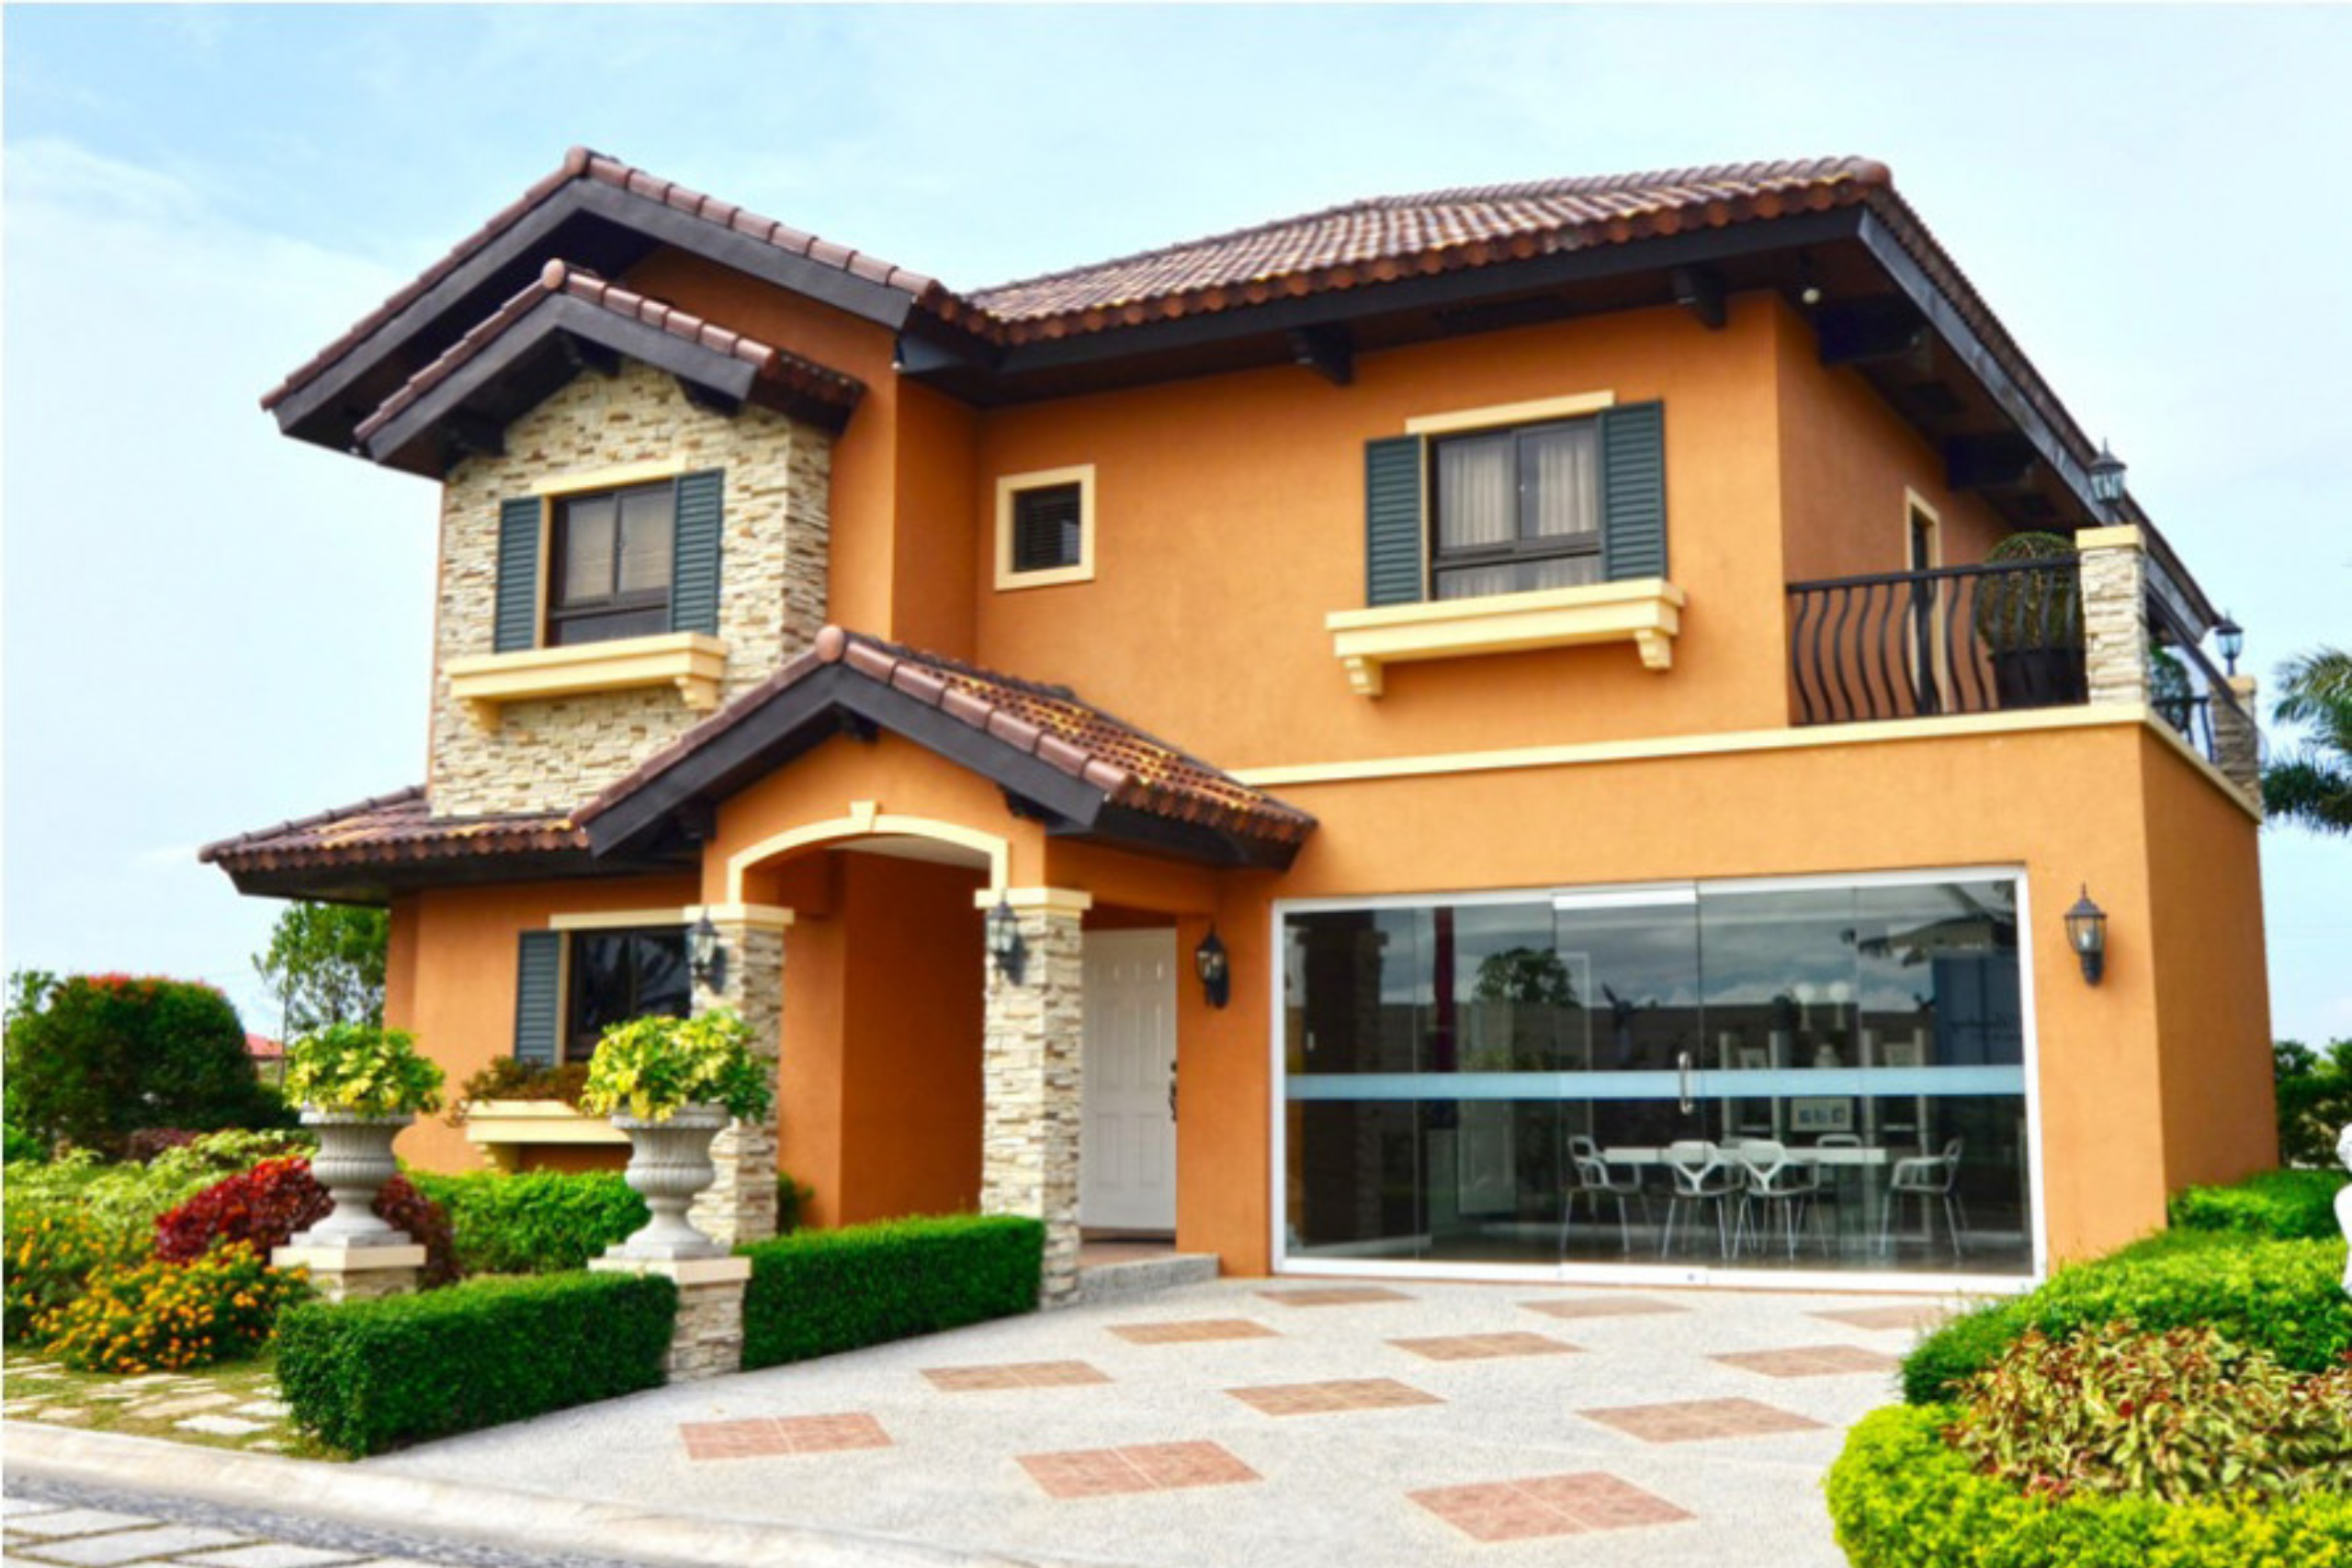 OFW Property Investment What are the Factors Affecting Appreciation in Real Estate